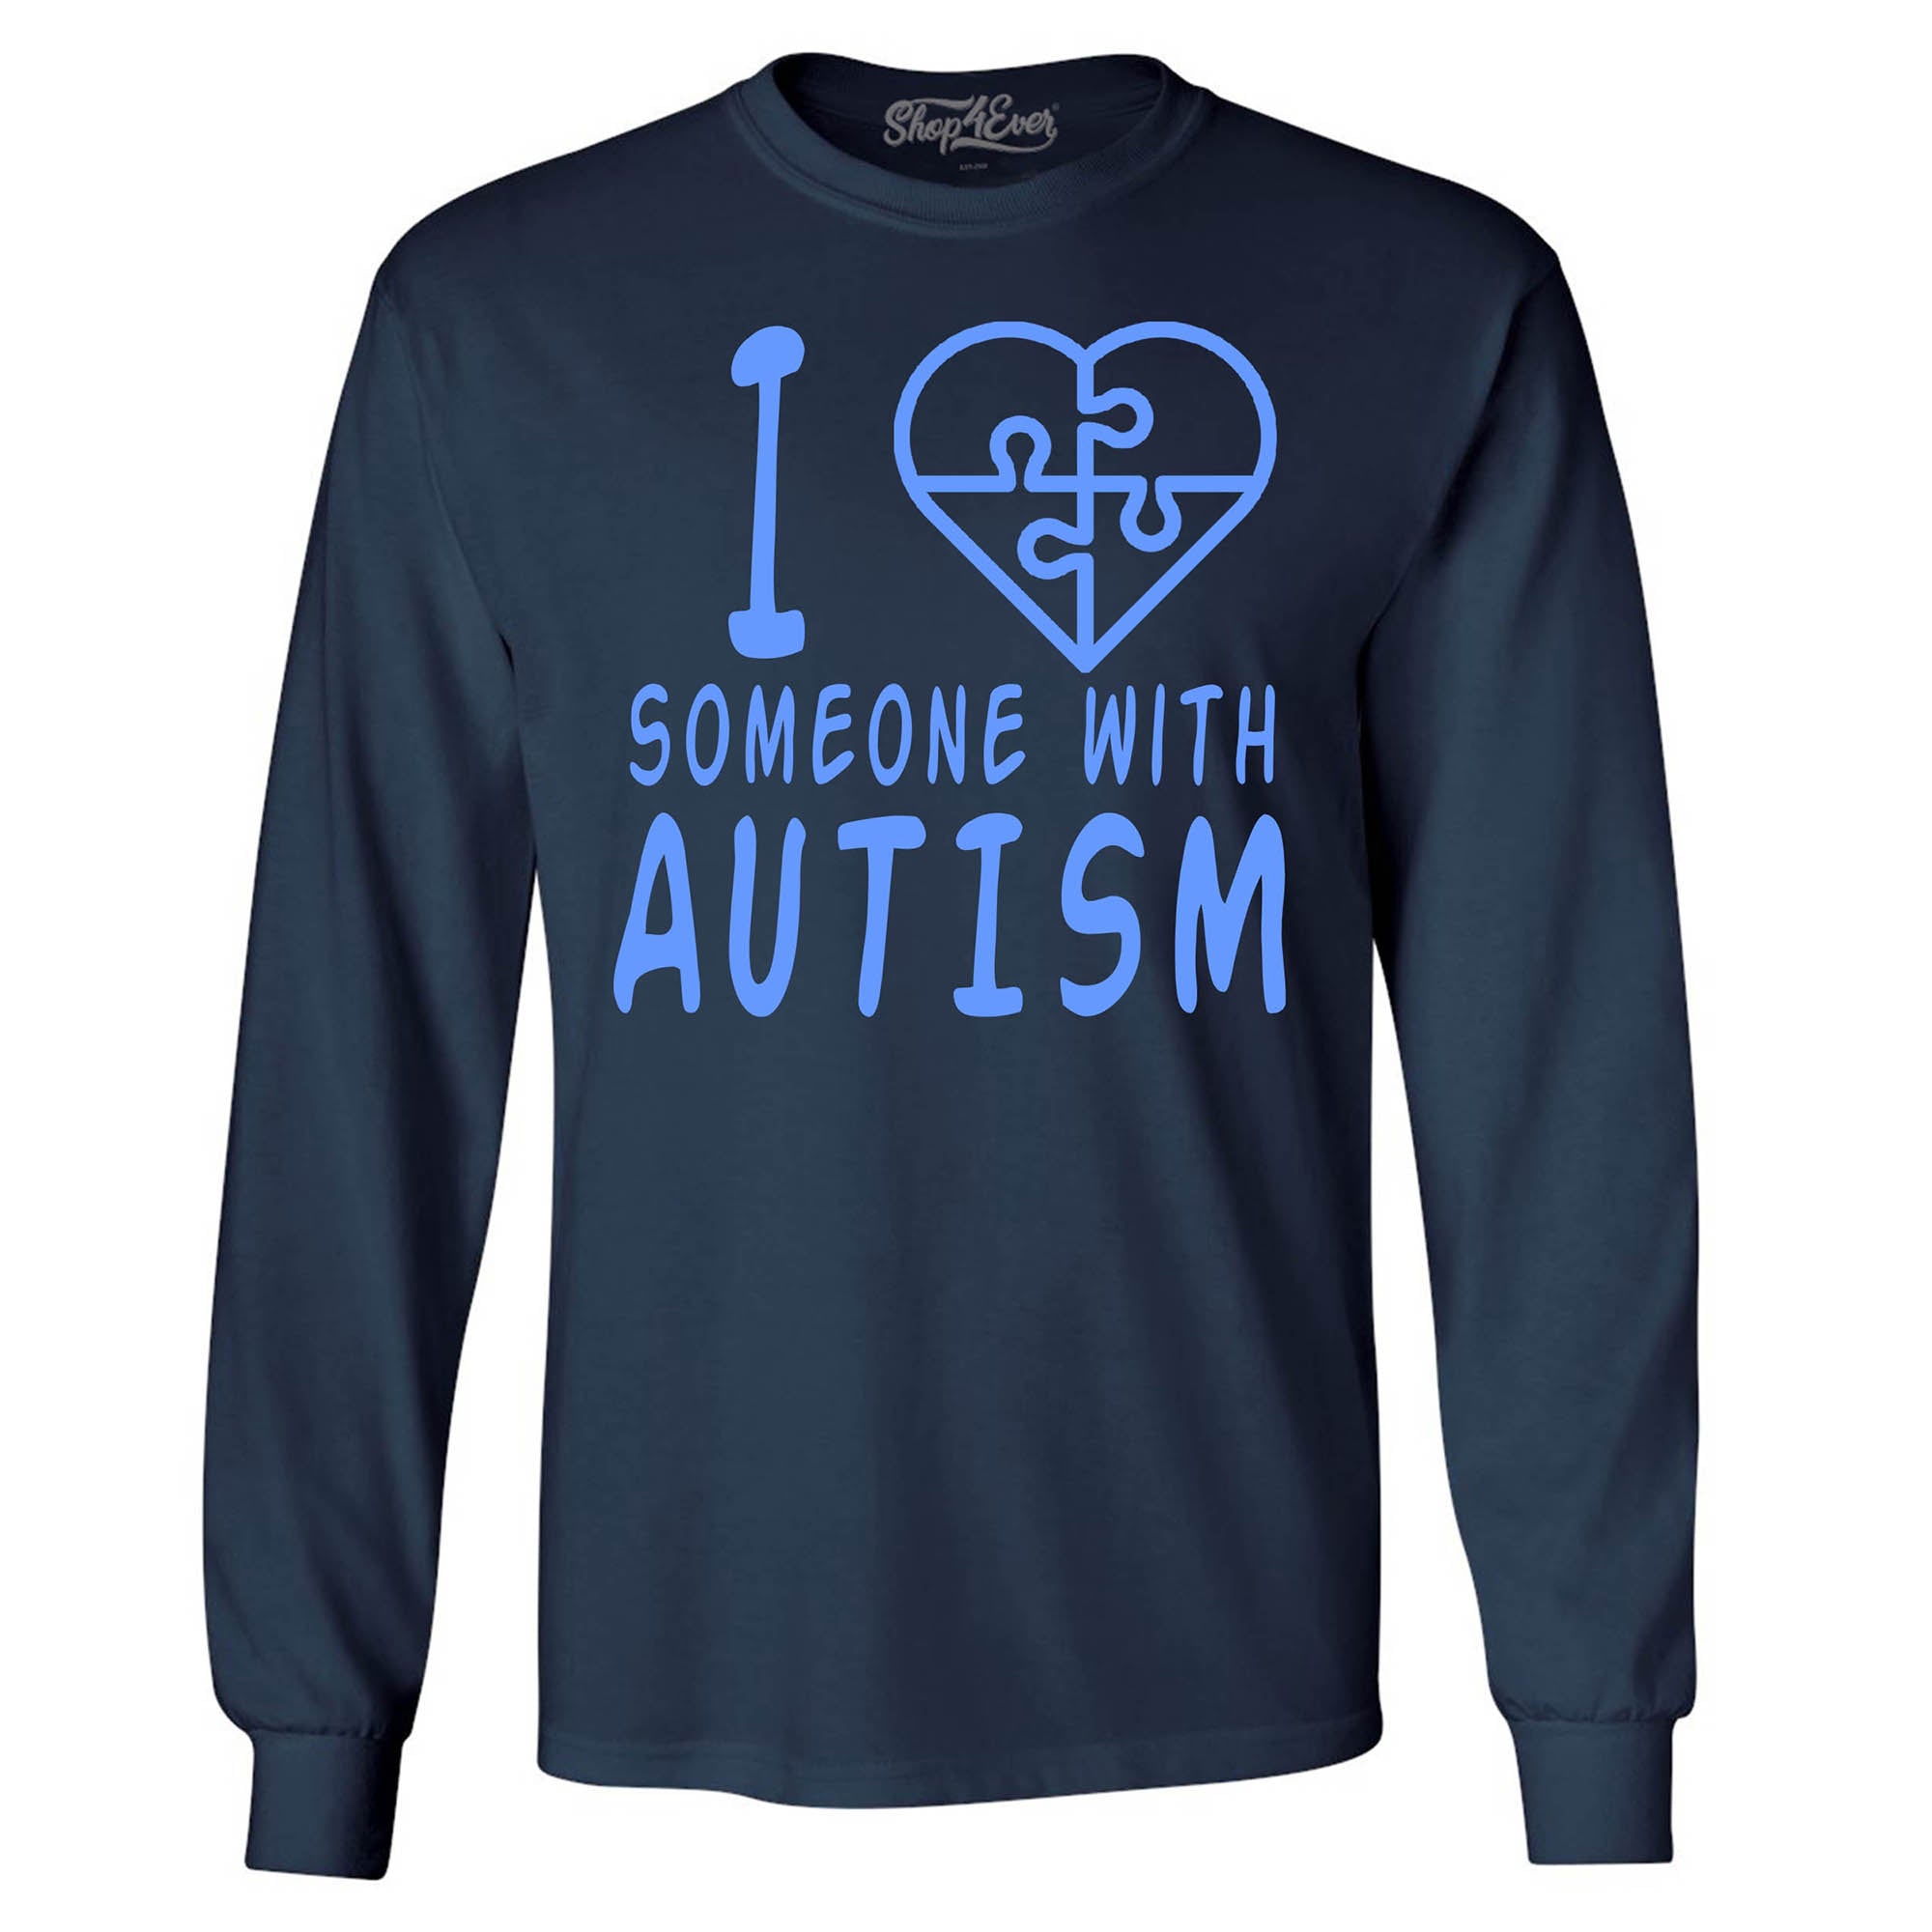 I Love Someone with Autism Blue Long Sleeve Shirt Autism Awareness Shirts